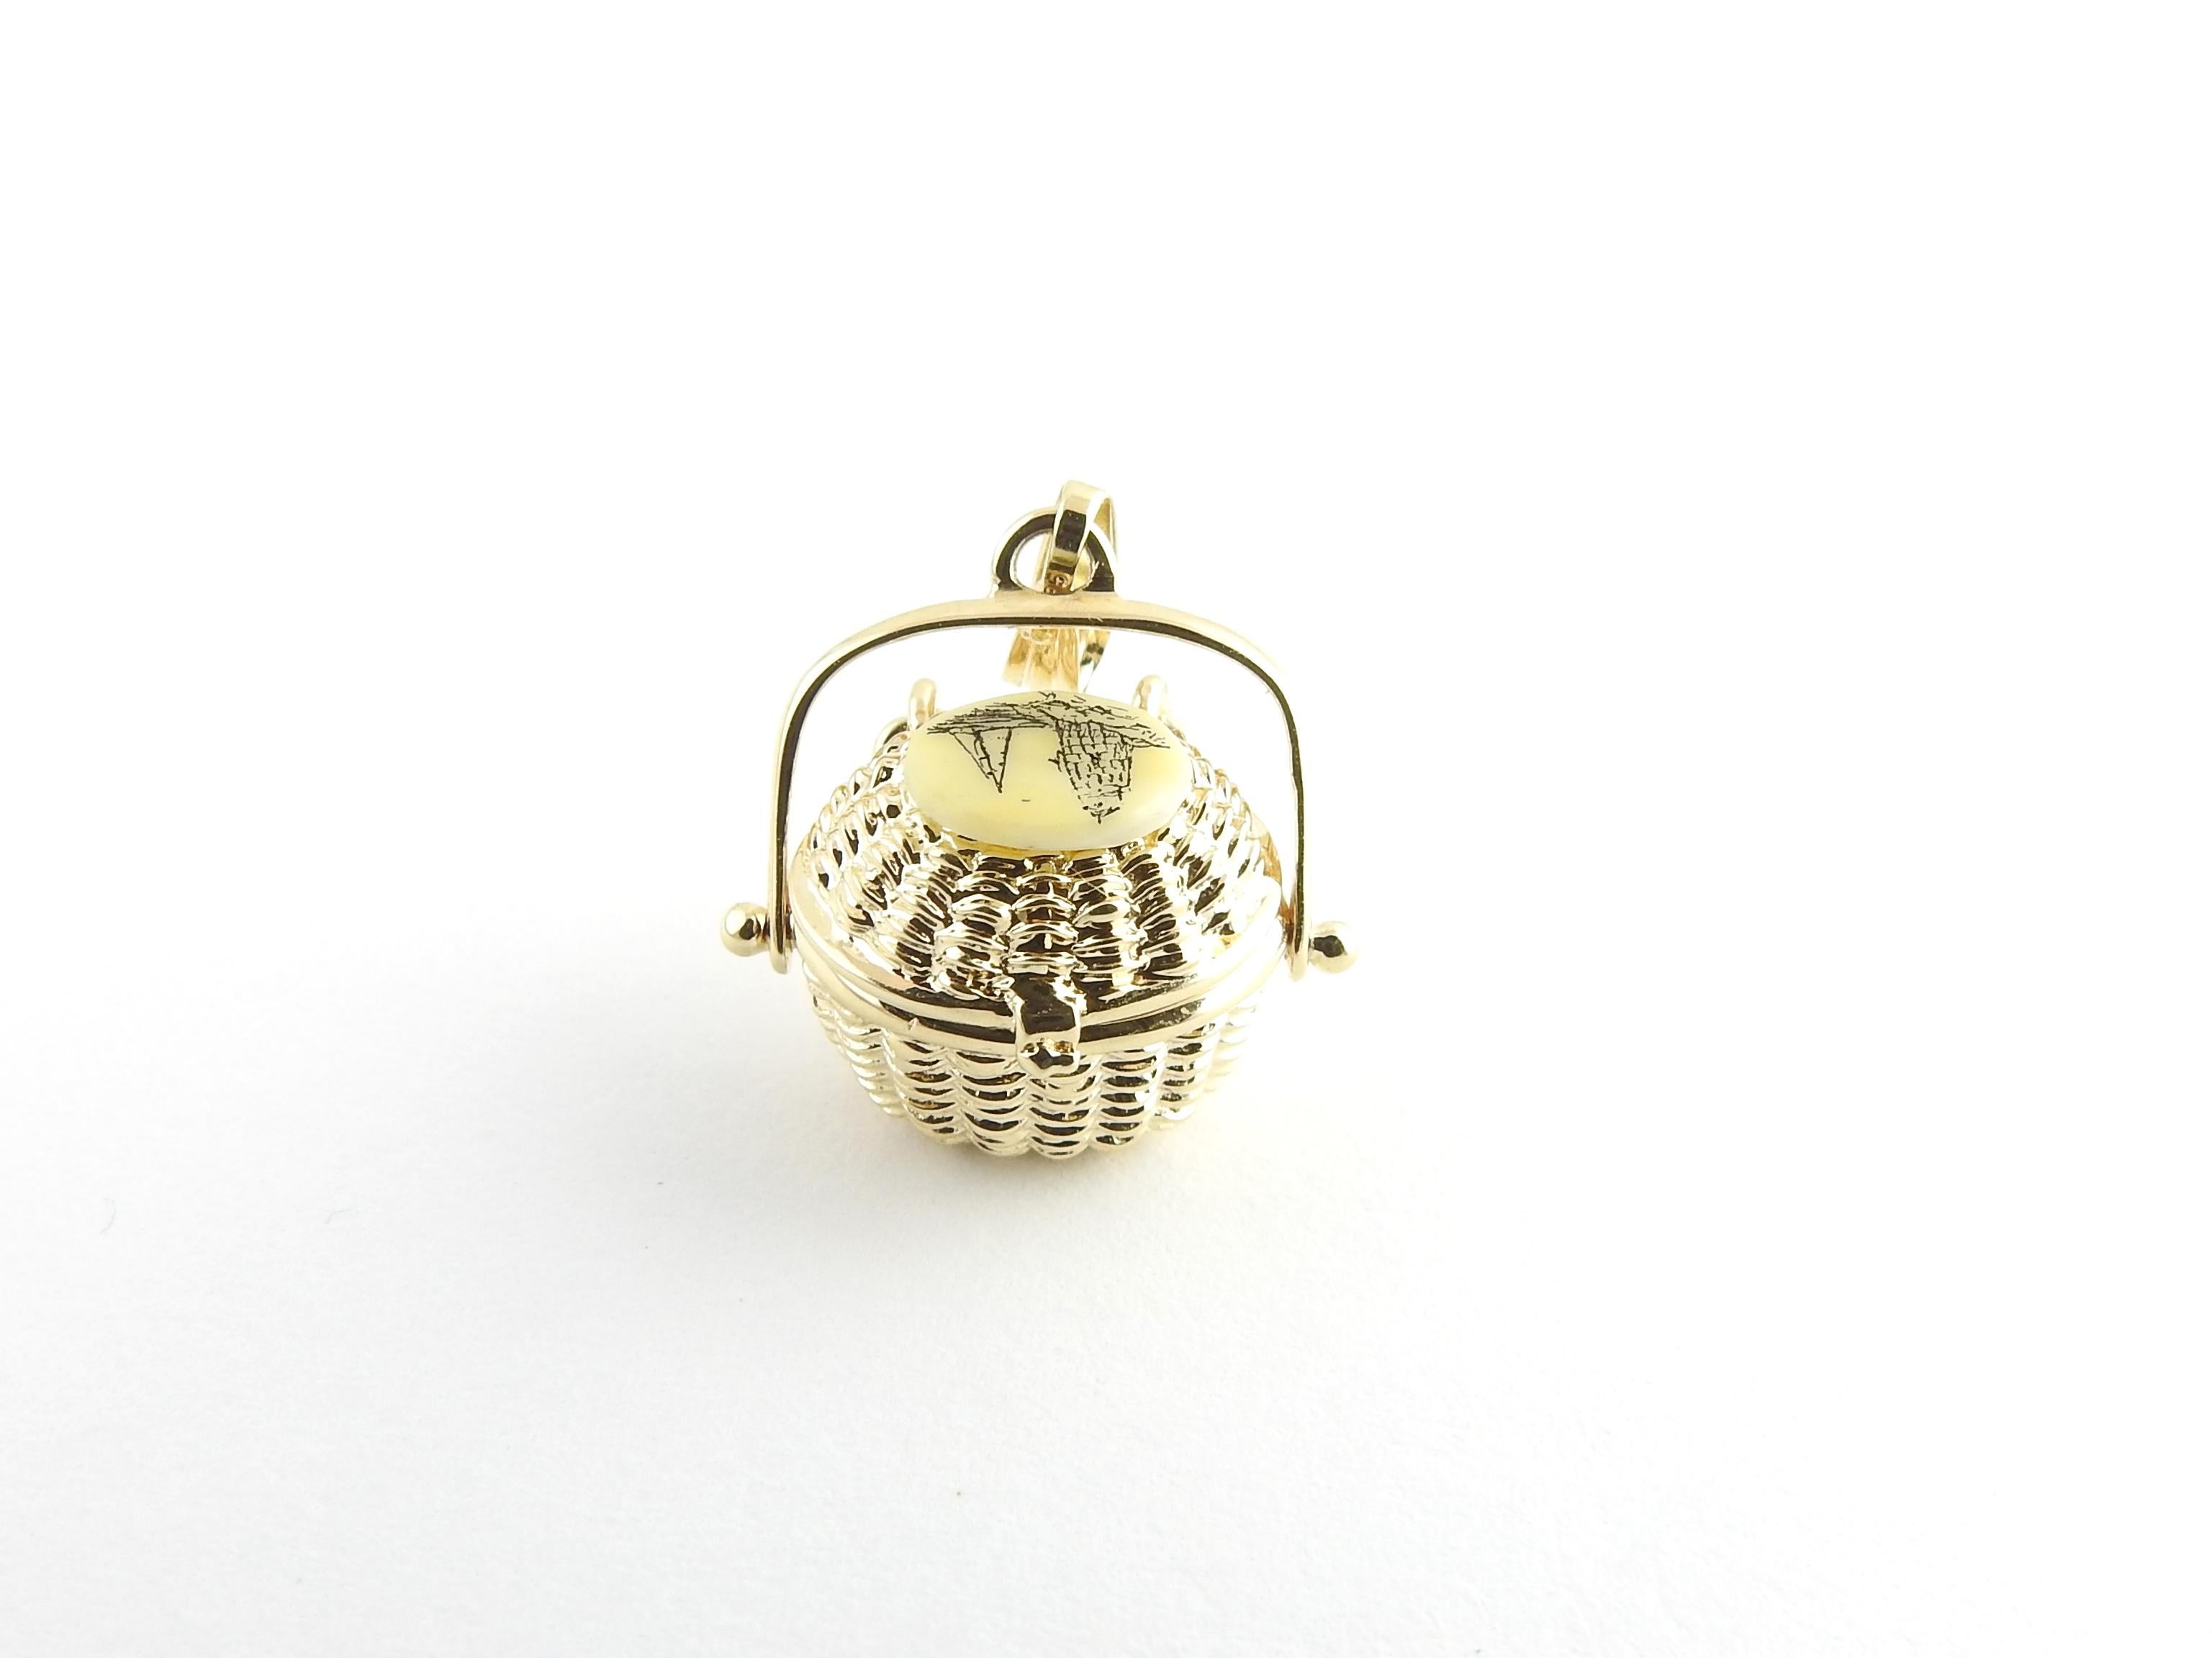 Vintage 14 Karat Yellow Gold Nantucket Basket Charm

Bring back those idyllic days at the shore!

This lovely 3D charm features a miniature Nantucket basket beautifully detailed in 14K yellow gold. Its hinged lid is decorated with a scrimshaw